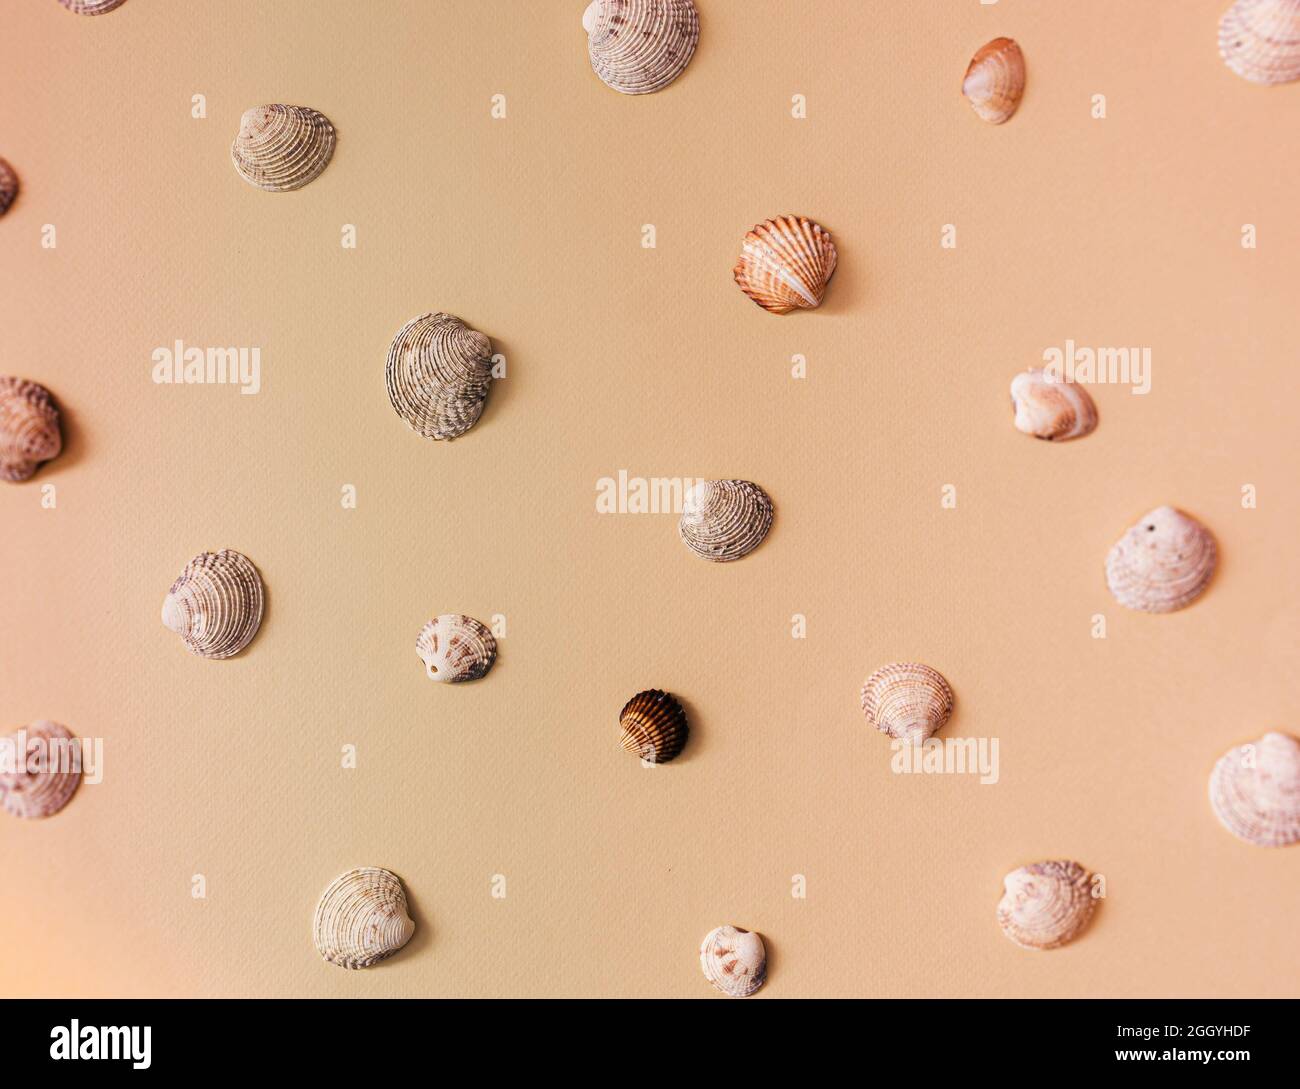 A Cute Pattern Or Wallpaper Made Of Sea Shells On Beige